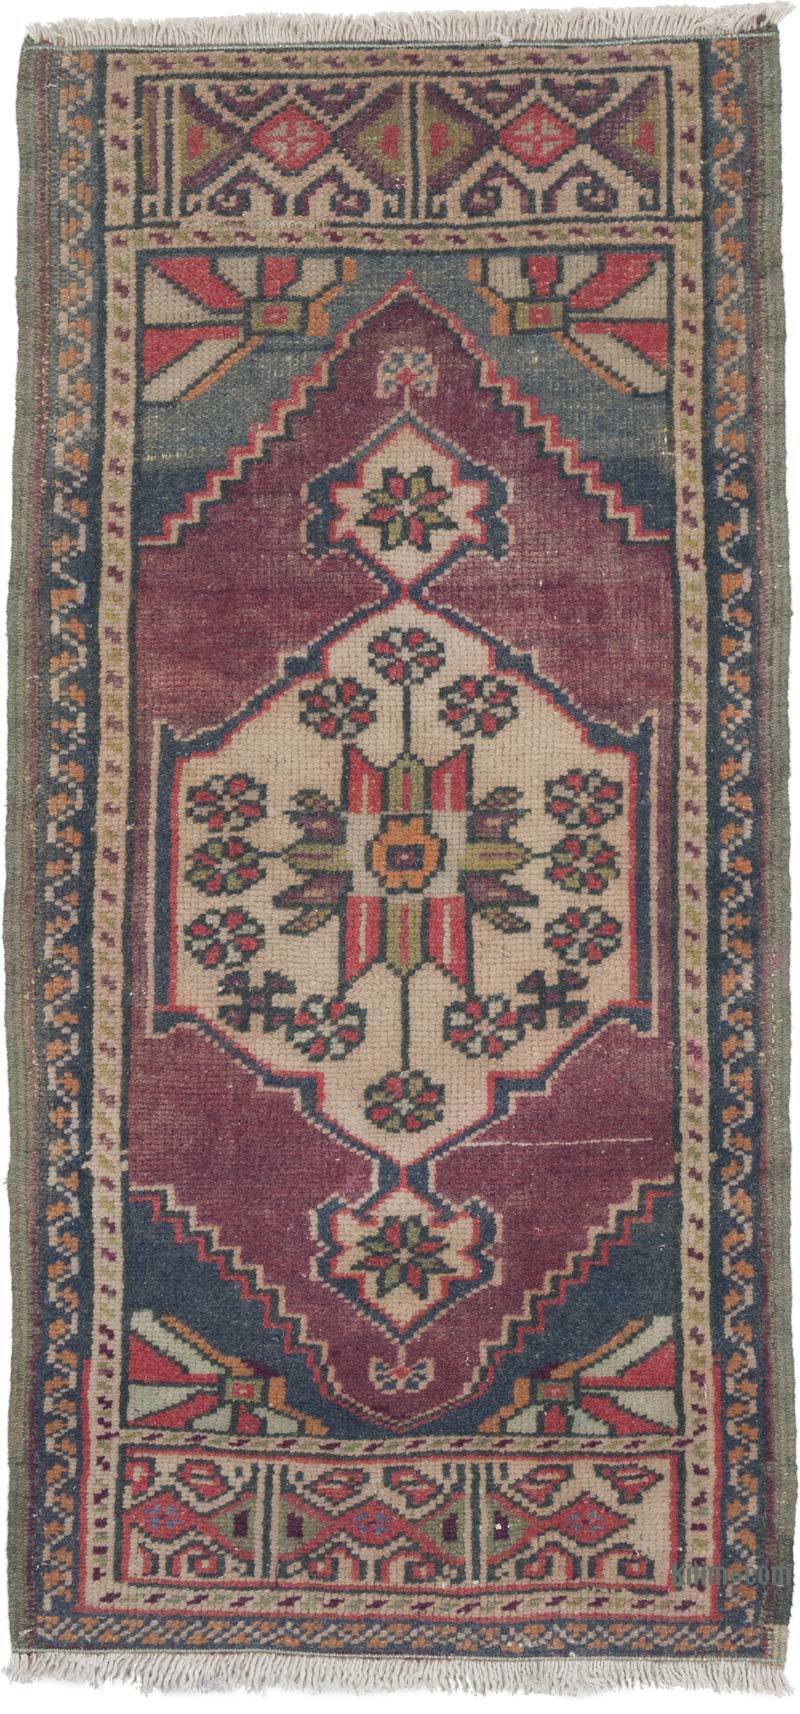 Vintage Turkish Hand-Knotted Rug - 1' 9" x 3' 7" (21 in. x 43 in.) - K0057719